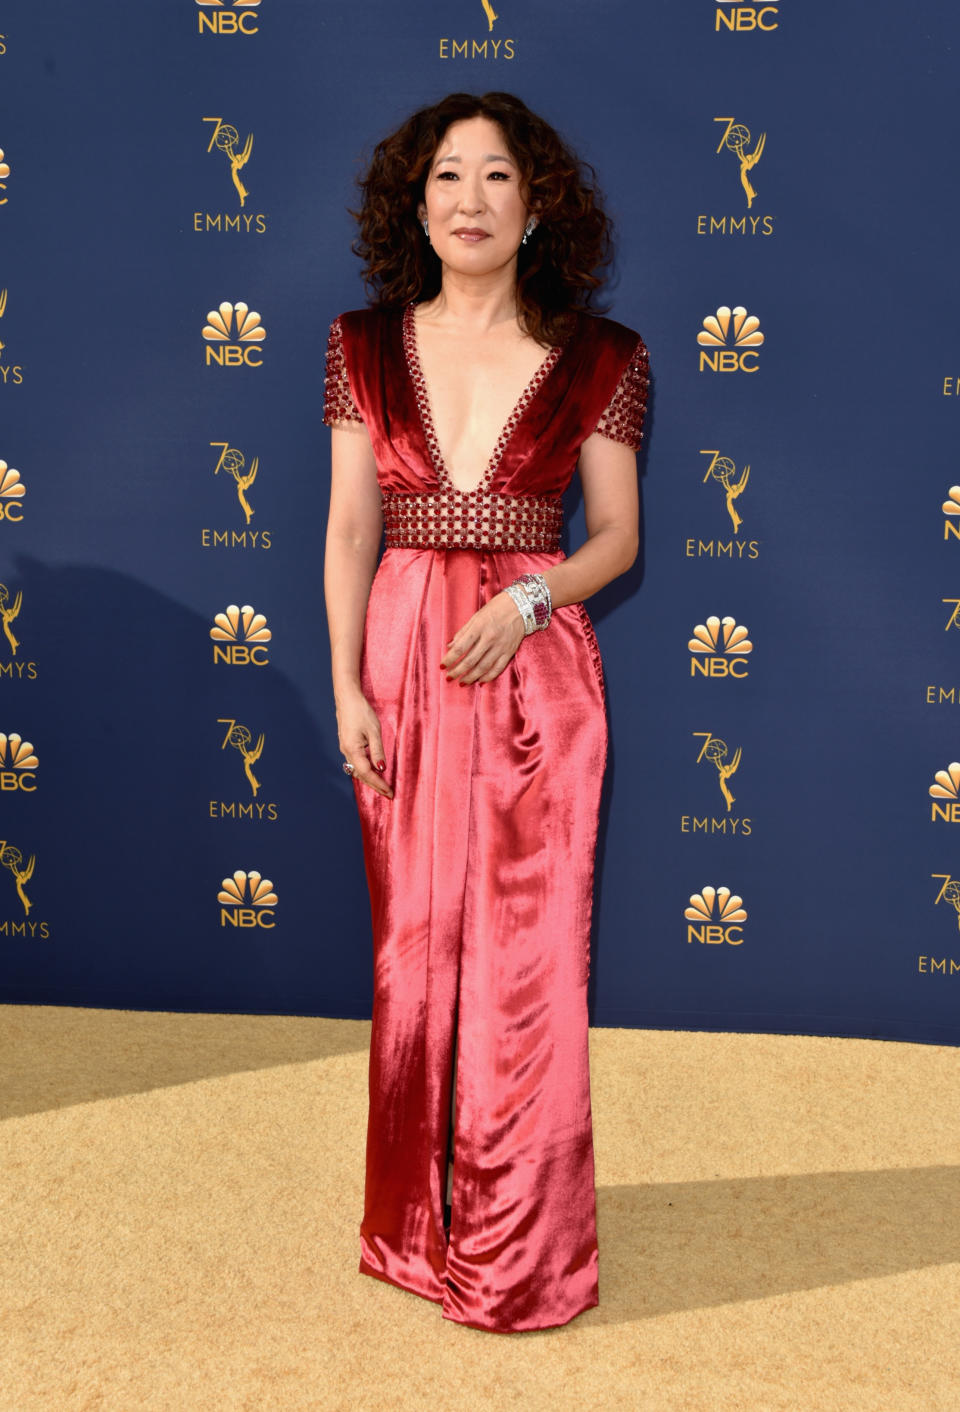 <p>Sandra Oh of Grey’s Anatomy fame poses in a silky red dress. <br>Photo: Getty </p>